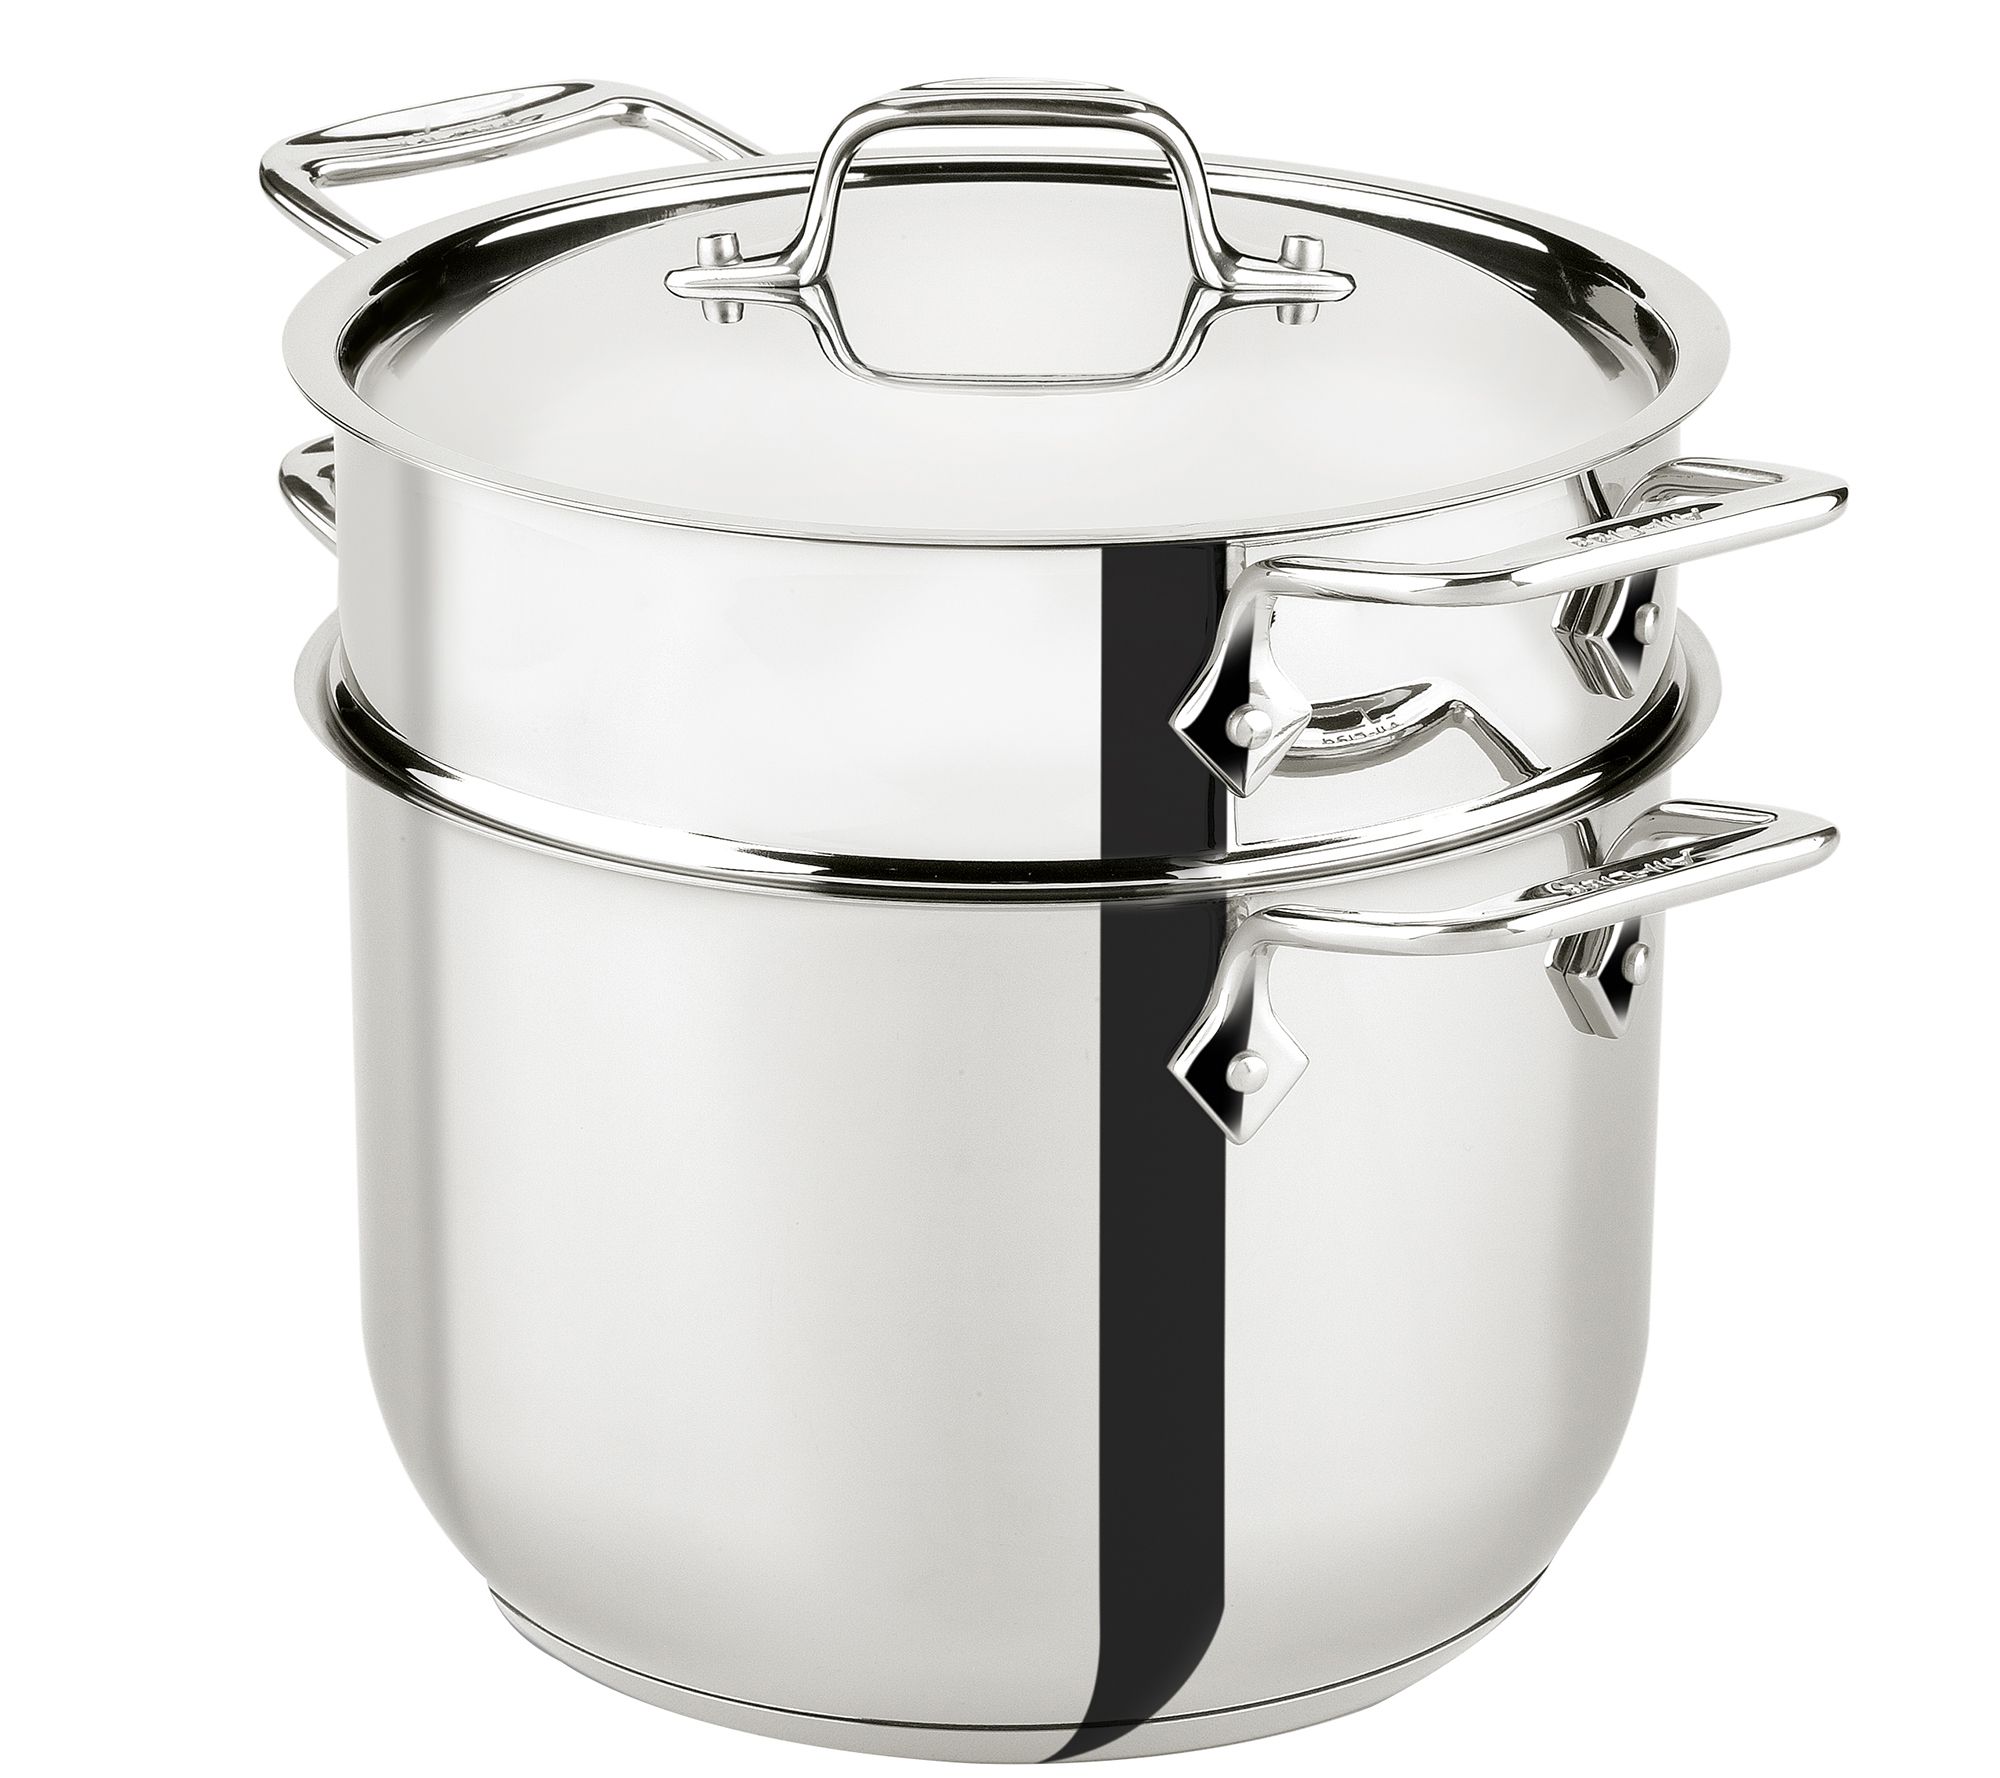 All Clad Stainless Steel 6 Quart Pasta Pot